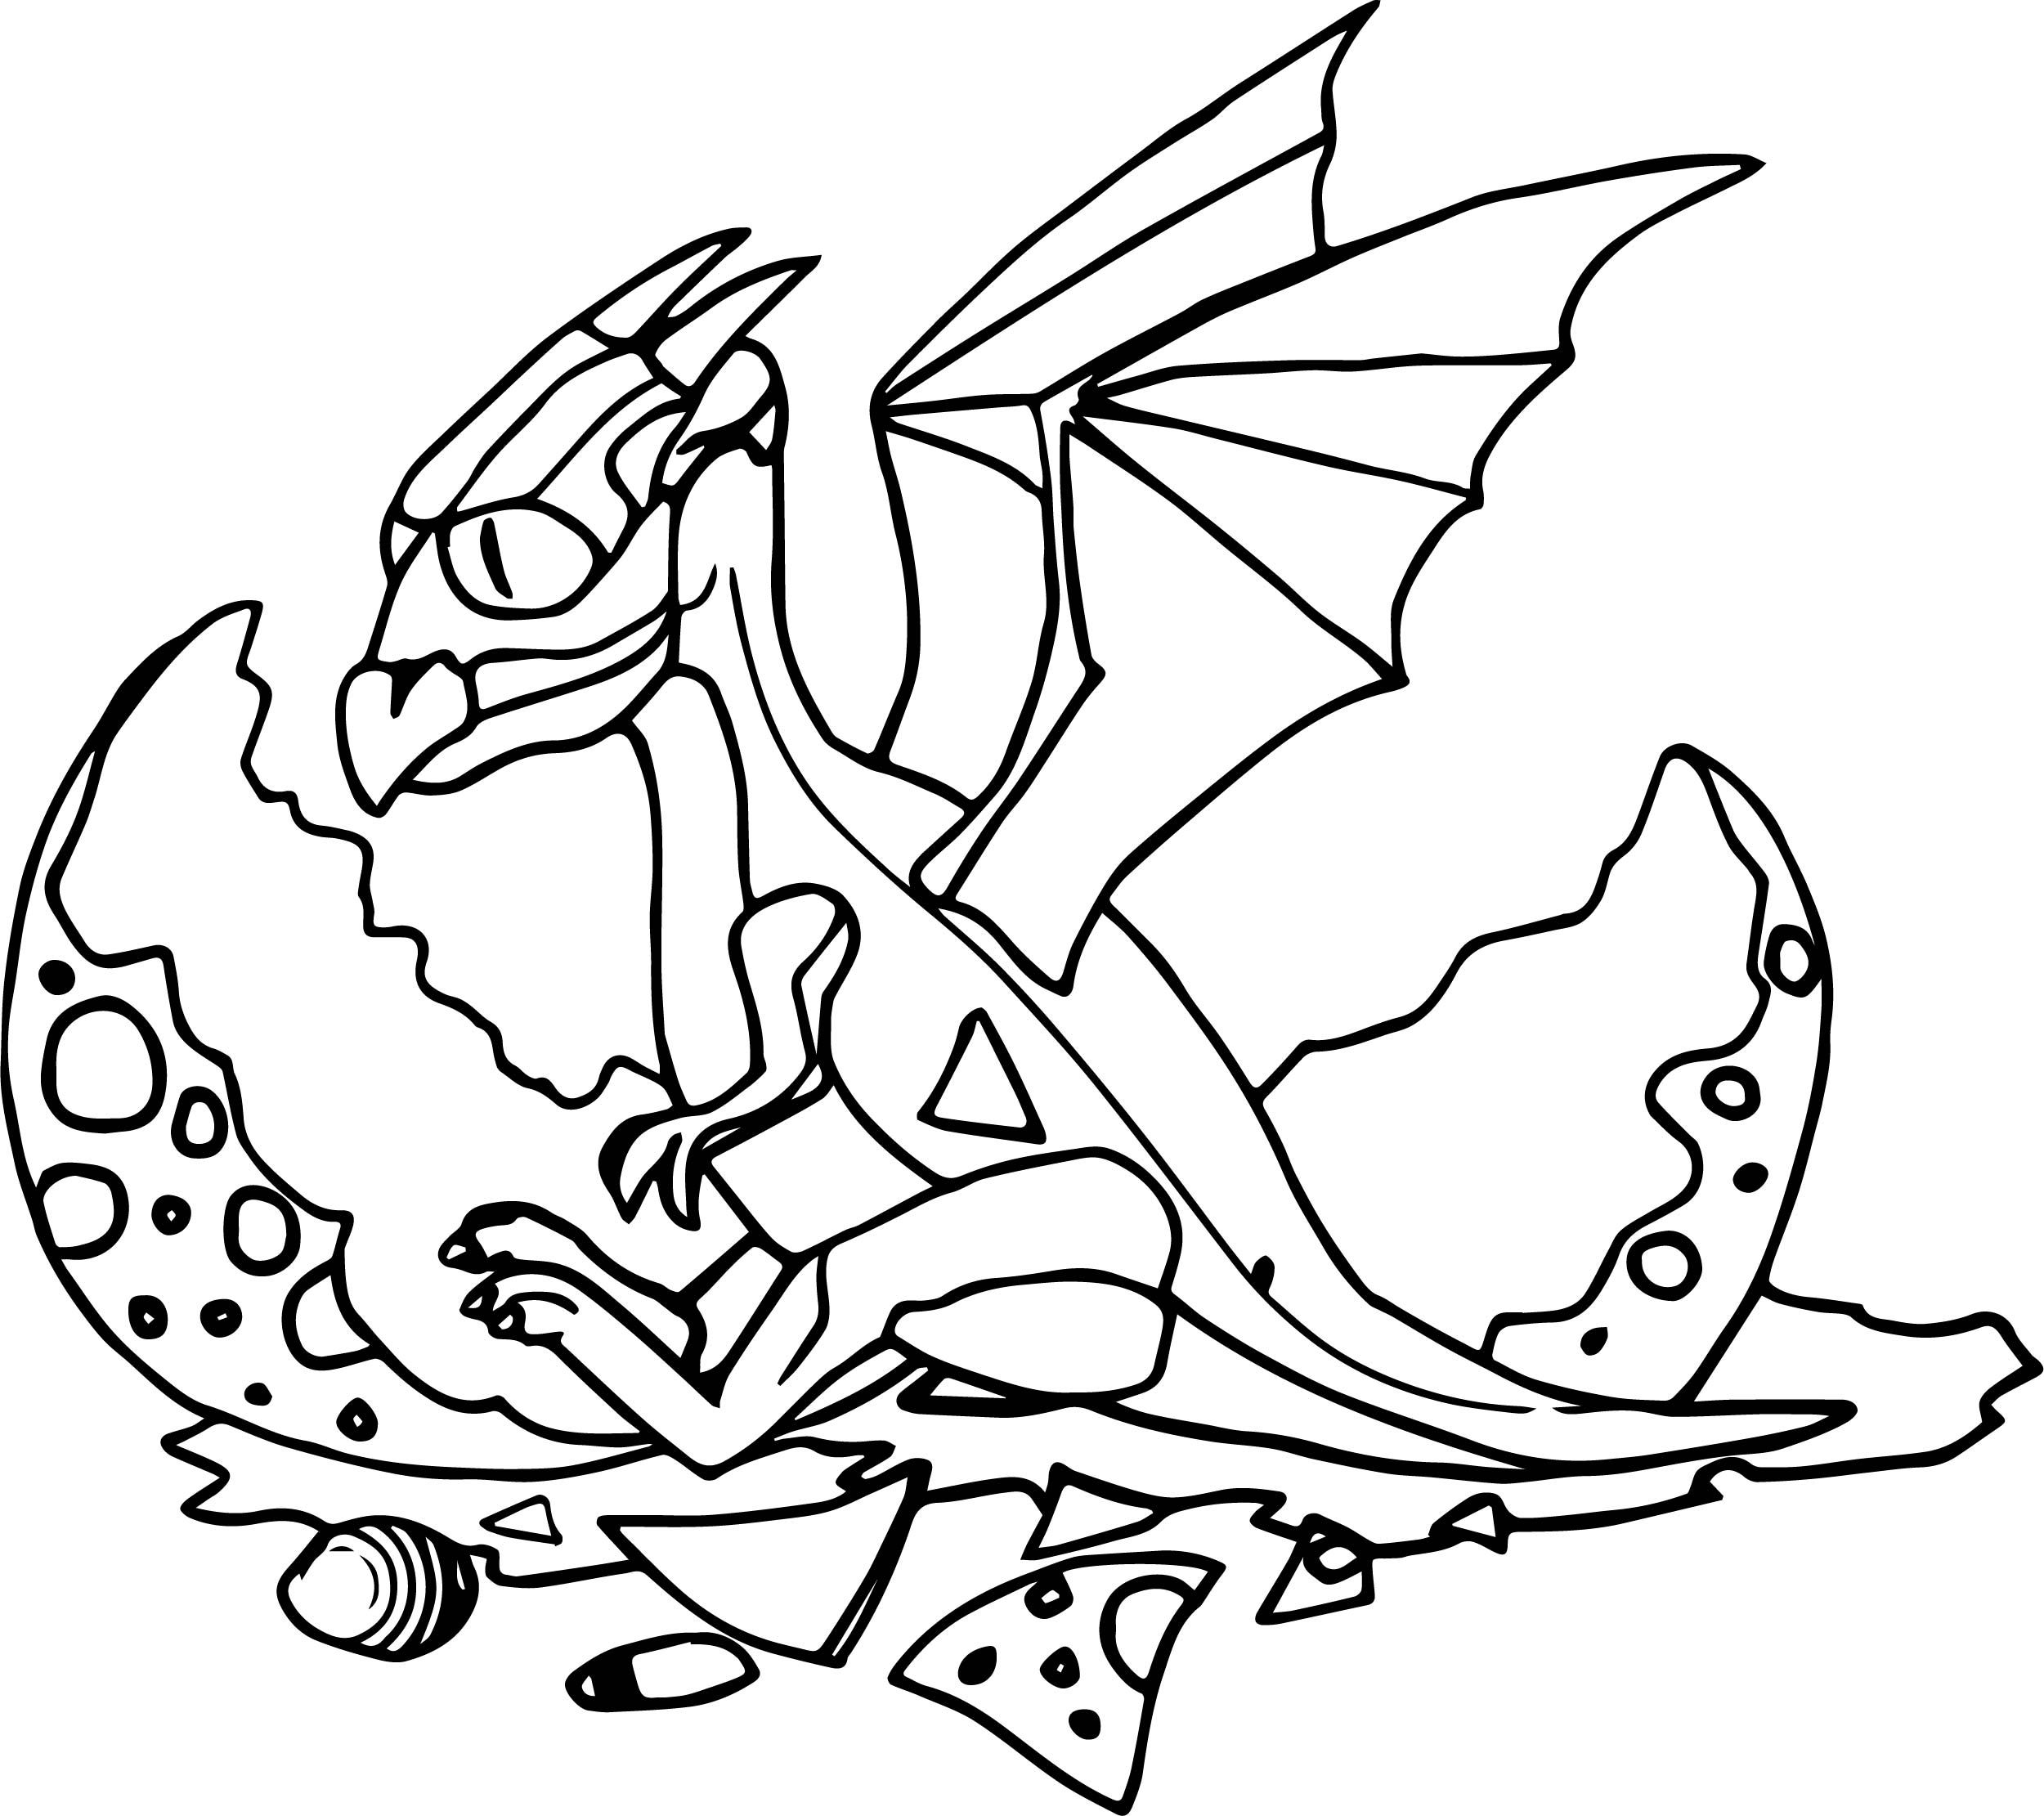 Cute Baby Dragon Coloring Pages PDF Free - Coloringfolder.com